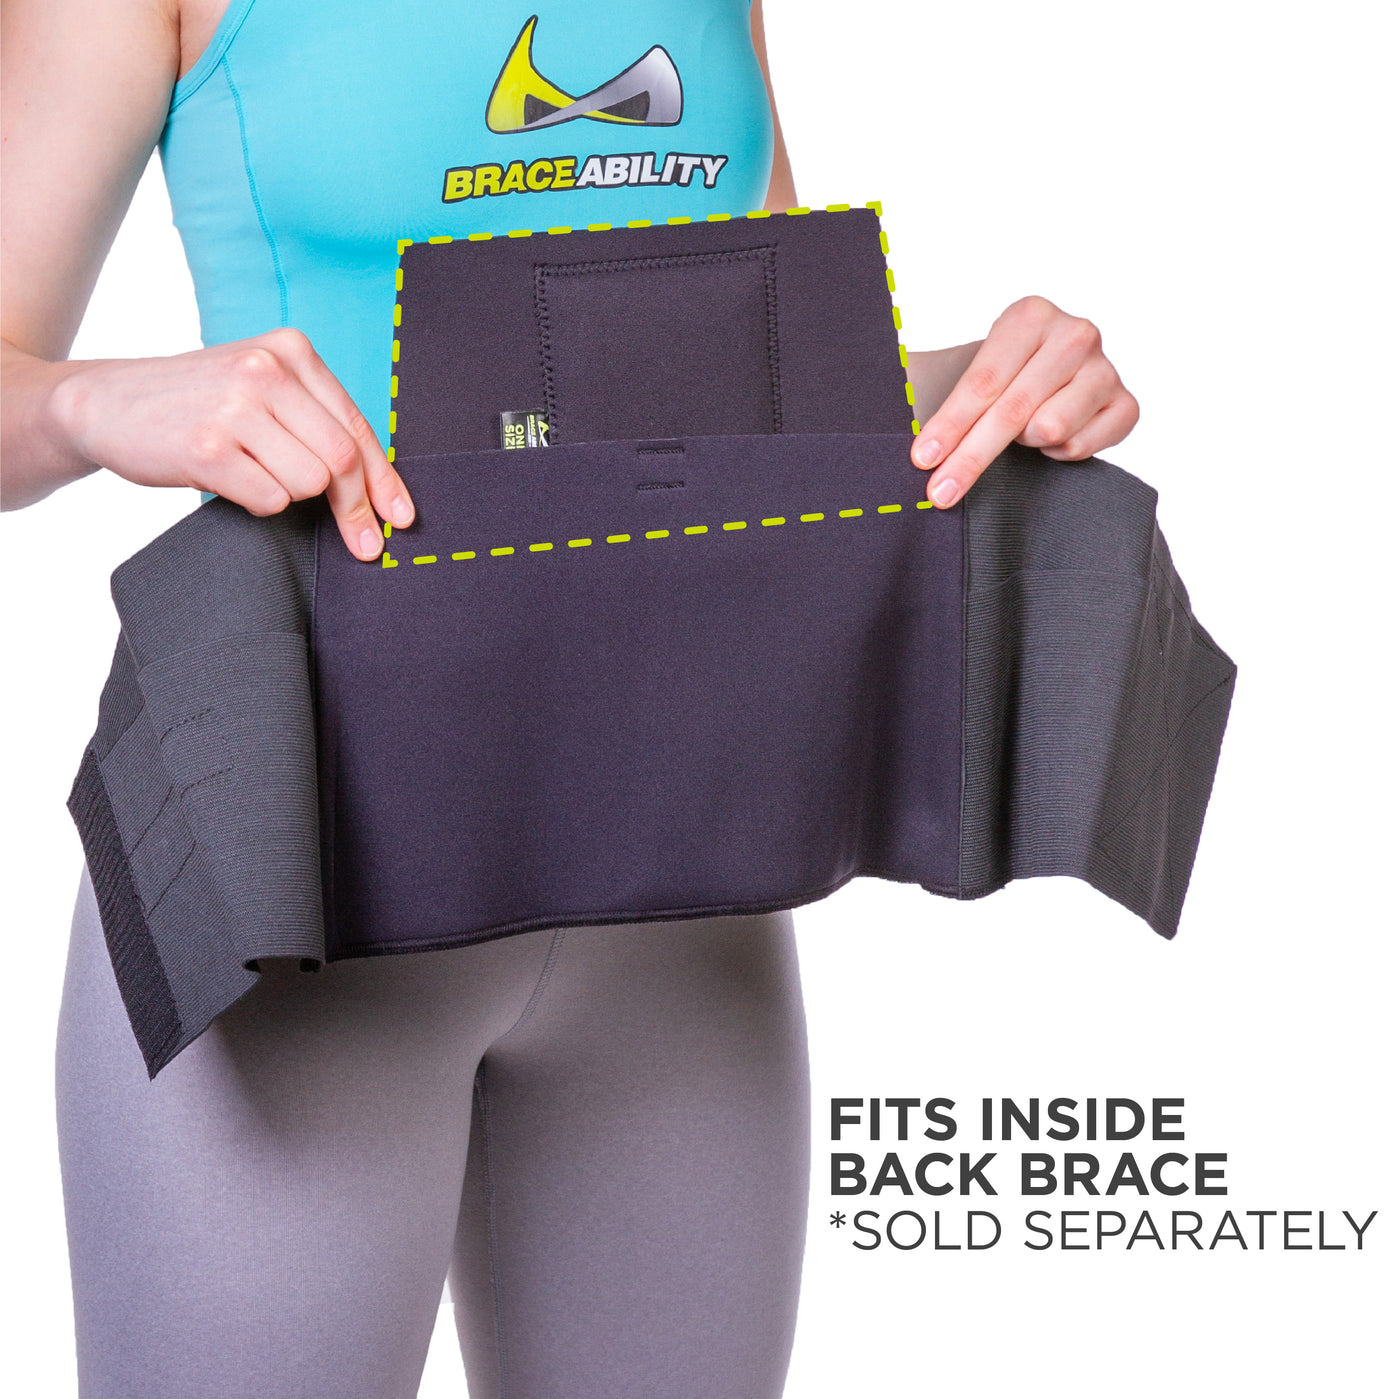 Worn inside a back brace, the pressure pad can add additional mid back support